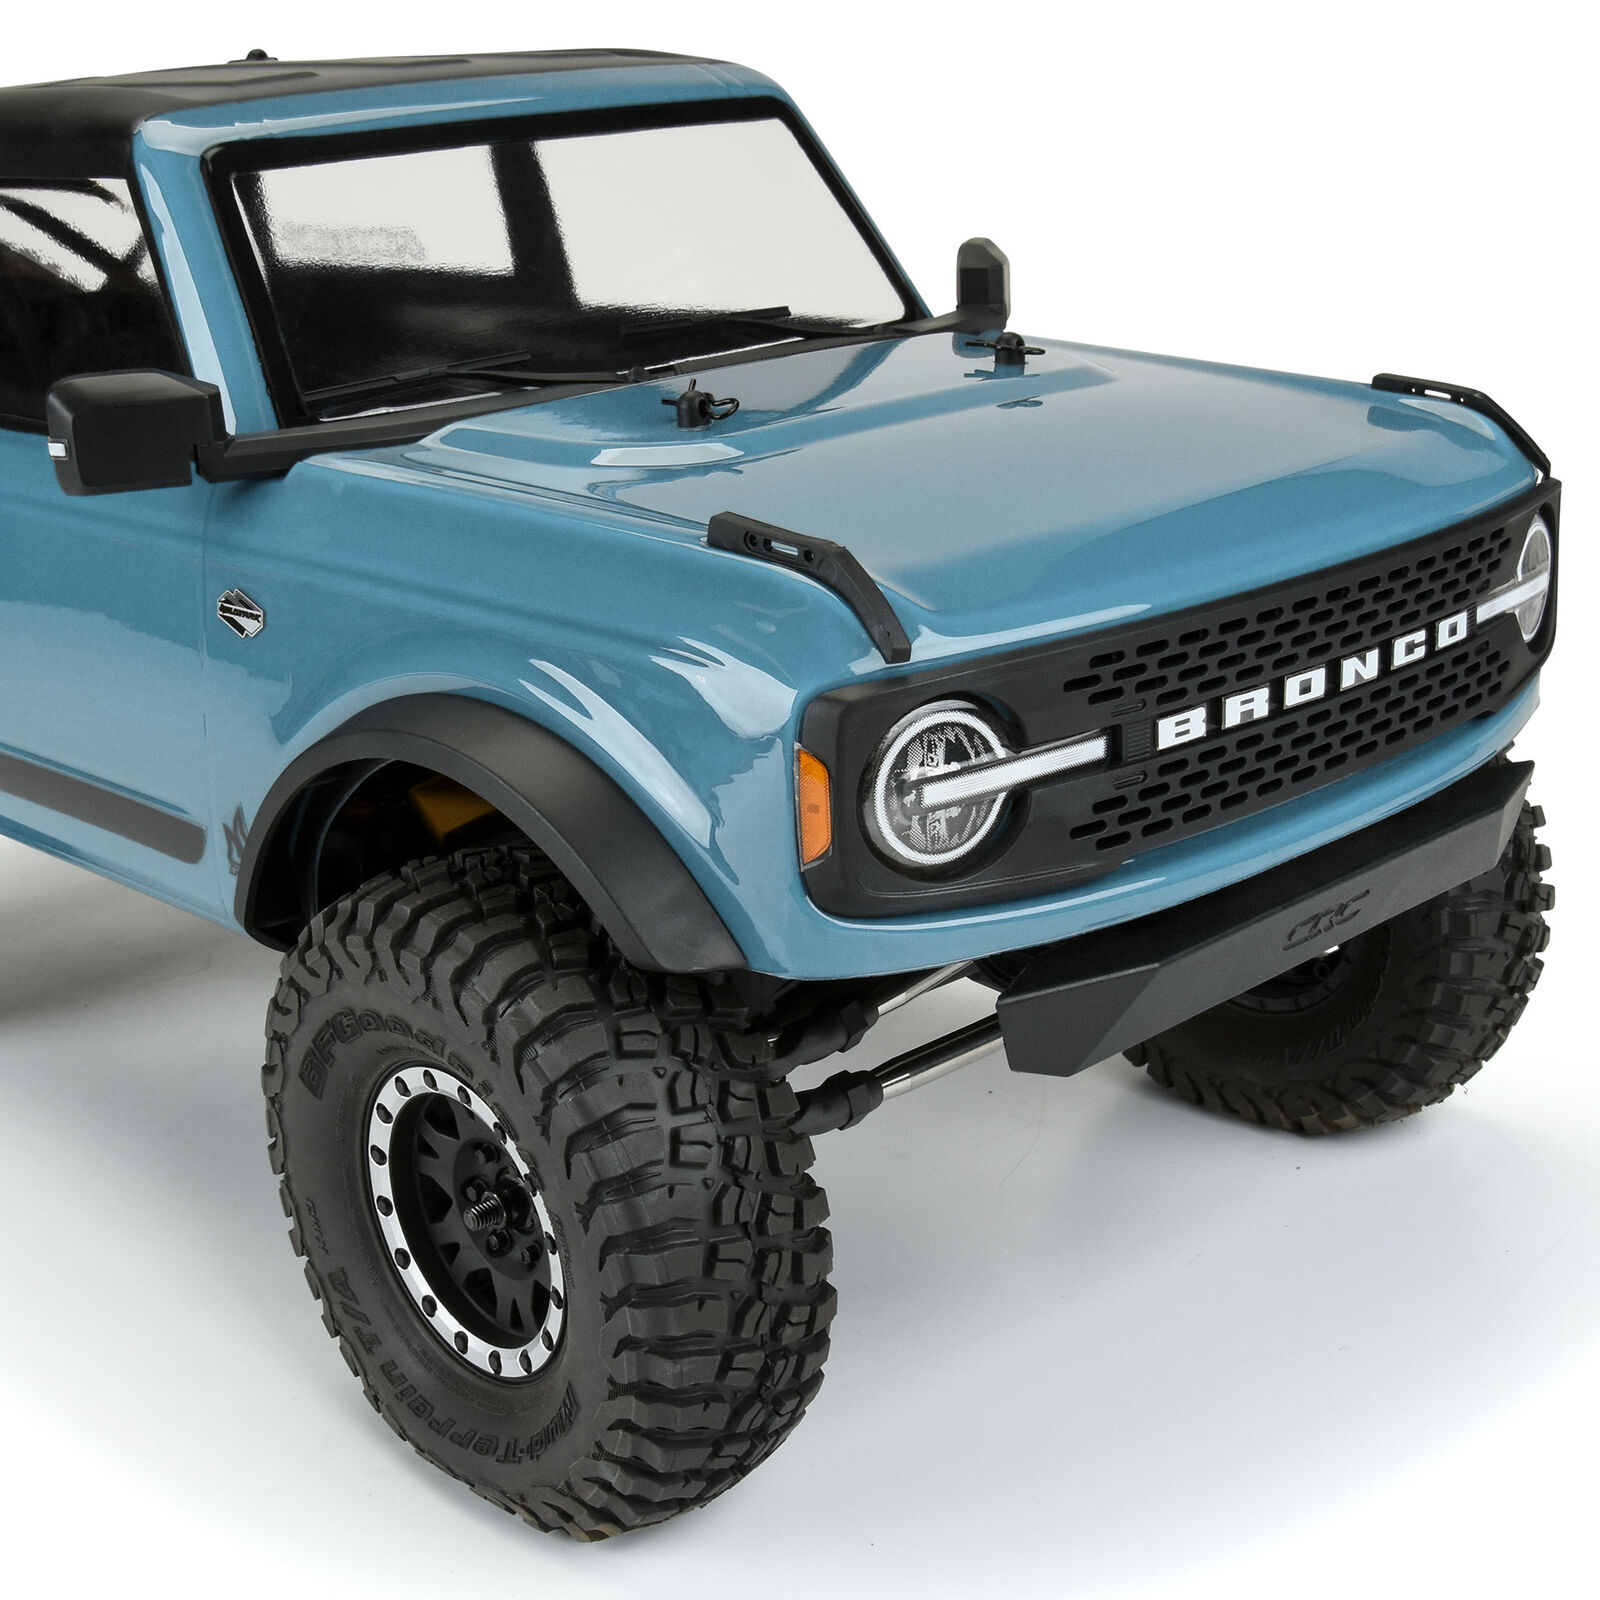 Pro-Line Racing 1/10 2021 Ford Bronco Clear Body Set 11.4